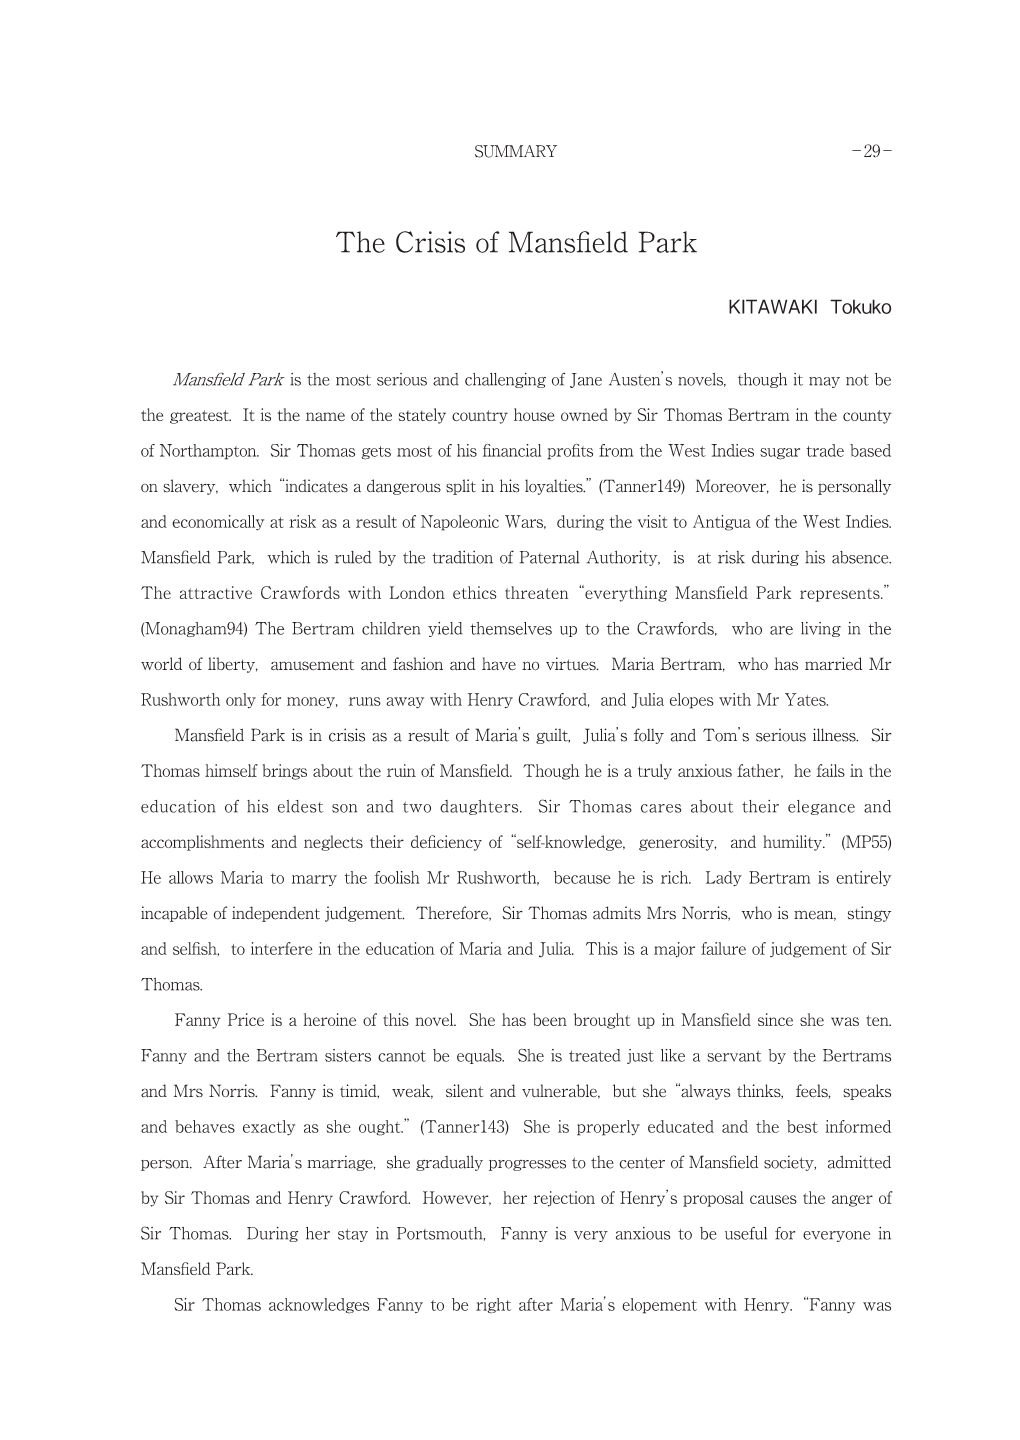 The Crisis of Mansfield Park